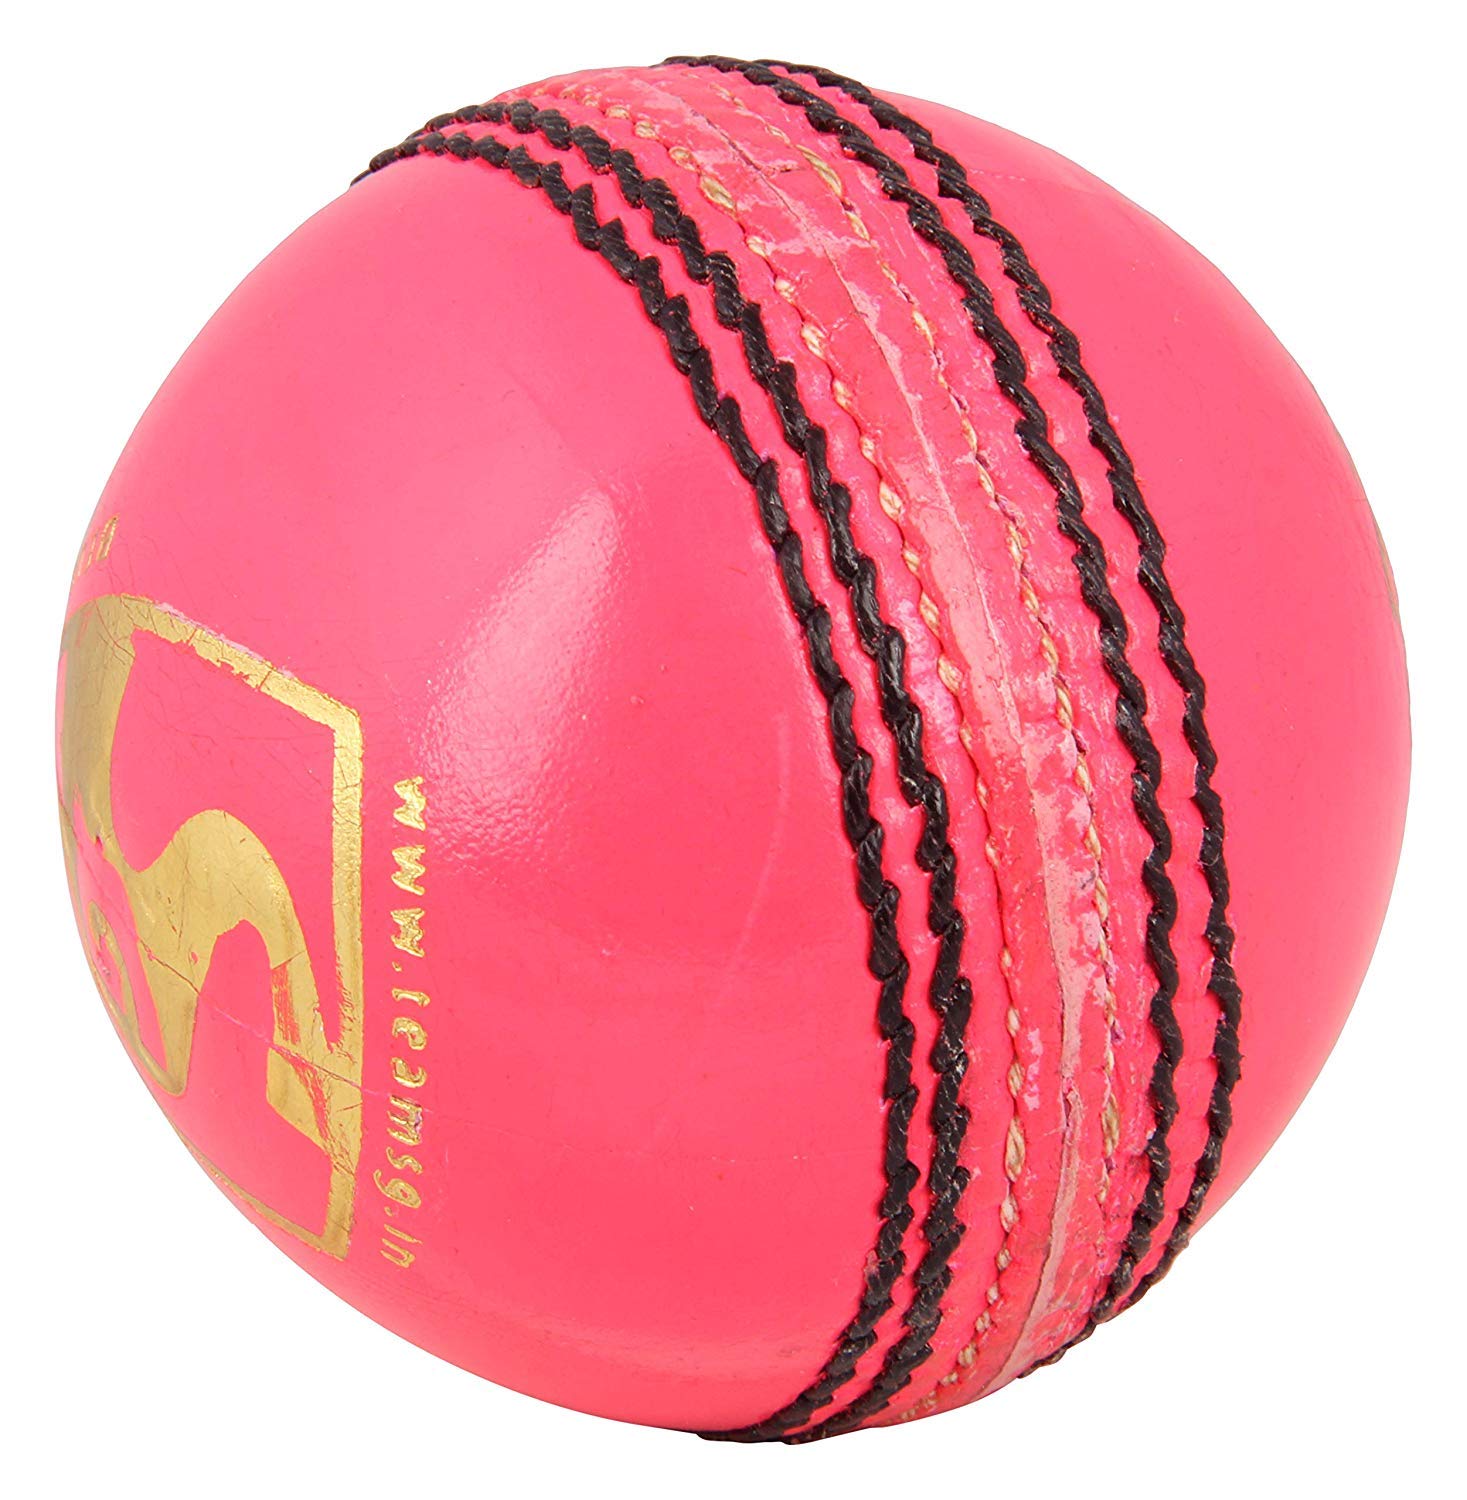 SG CLUB FOUR PIECE PINK LEATHER BALL